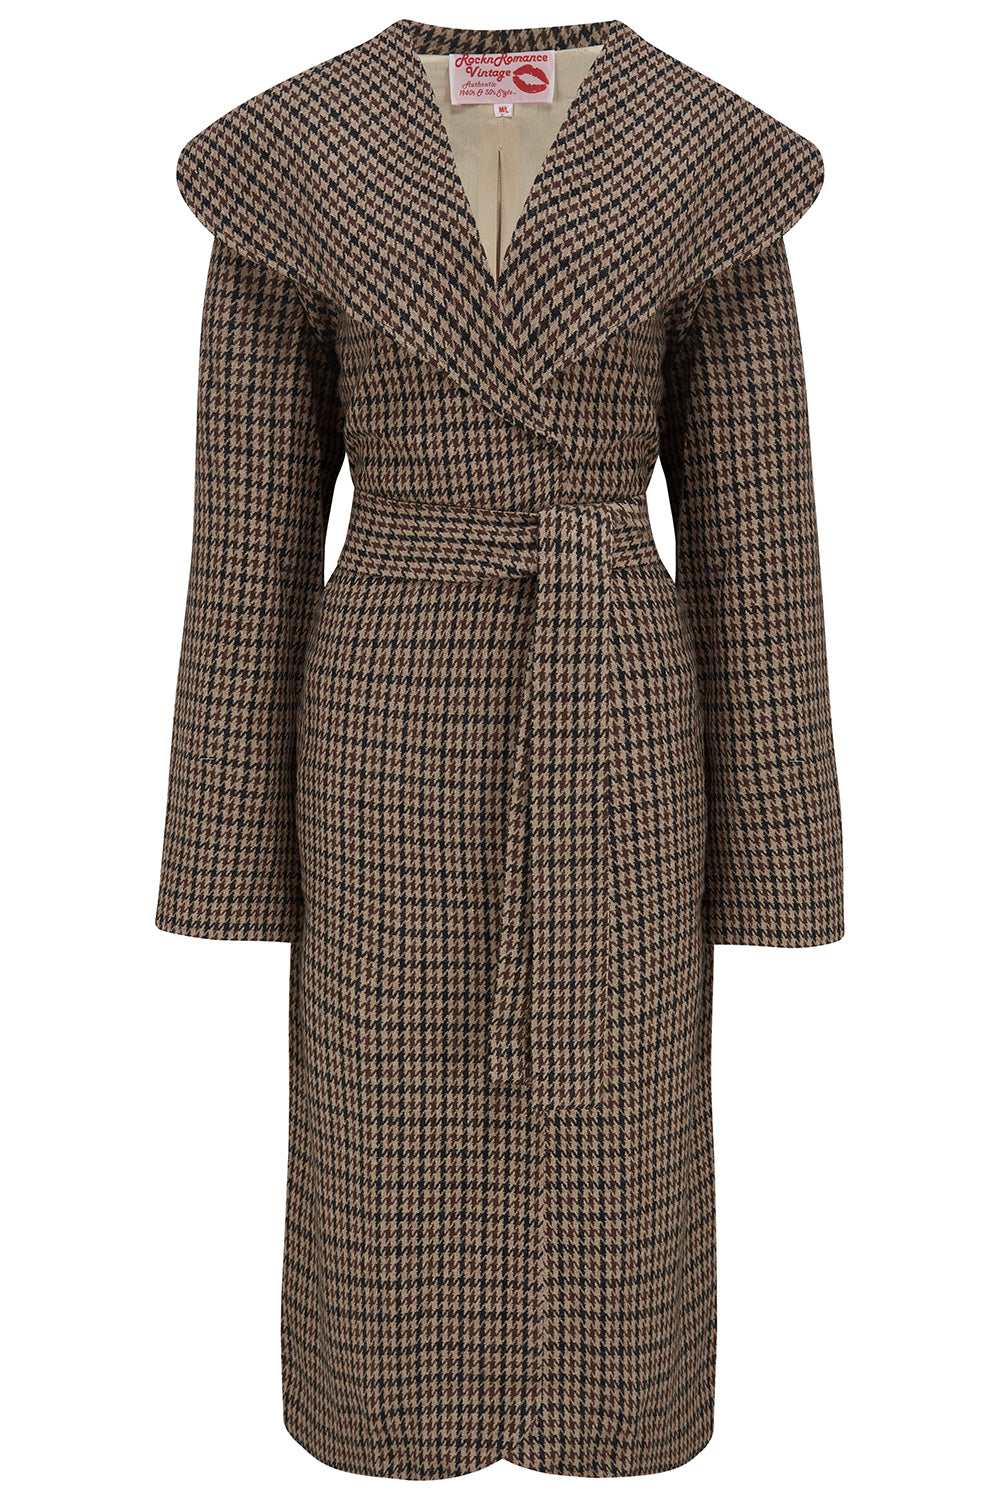 The "Monroe" Wrap Coat in Brown Houndstooth.. True & Authentic Late 1940s, Early 50s Vintage Style - True and authentic vintage style clothing, inspired by the Classic styles of CC41 , WW2 and the fun 1950s RocknRoll era, for everyday wear plus events like Goodwood Revival, Twinwood Festival and Viva Las Vegas Rockabilly Weekend Rock n Romance Rock n Romance